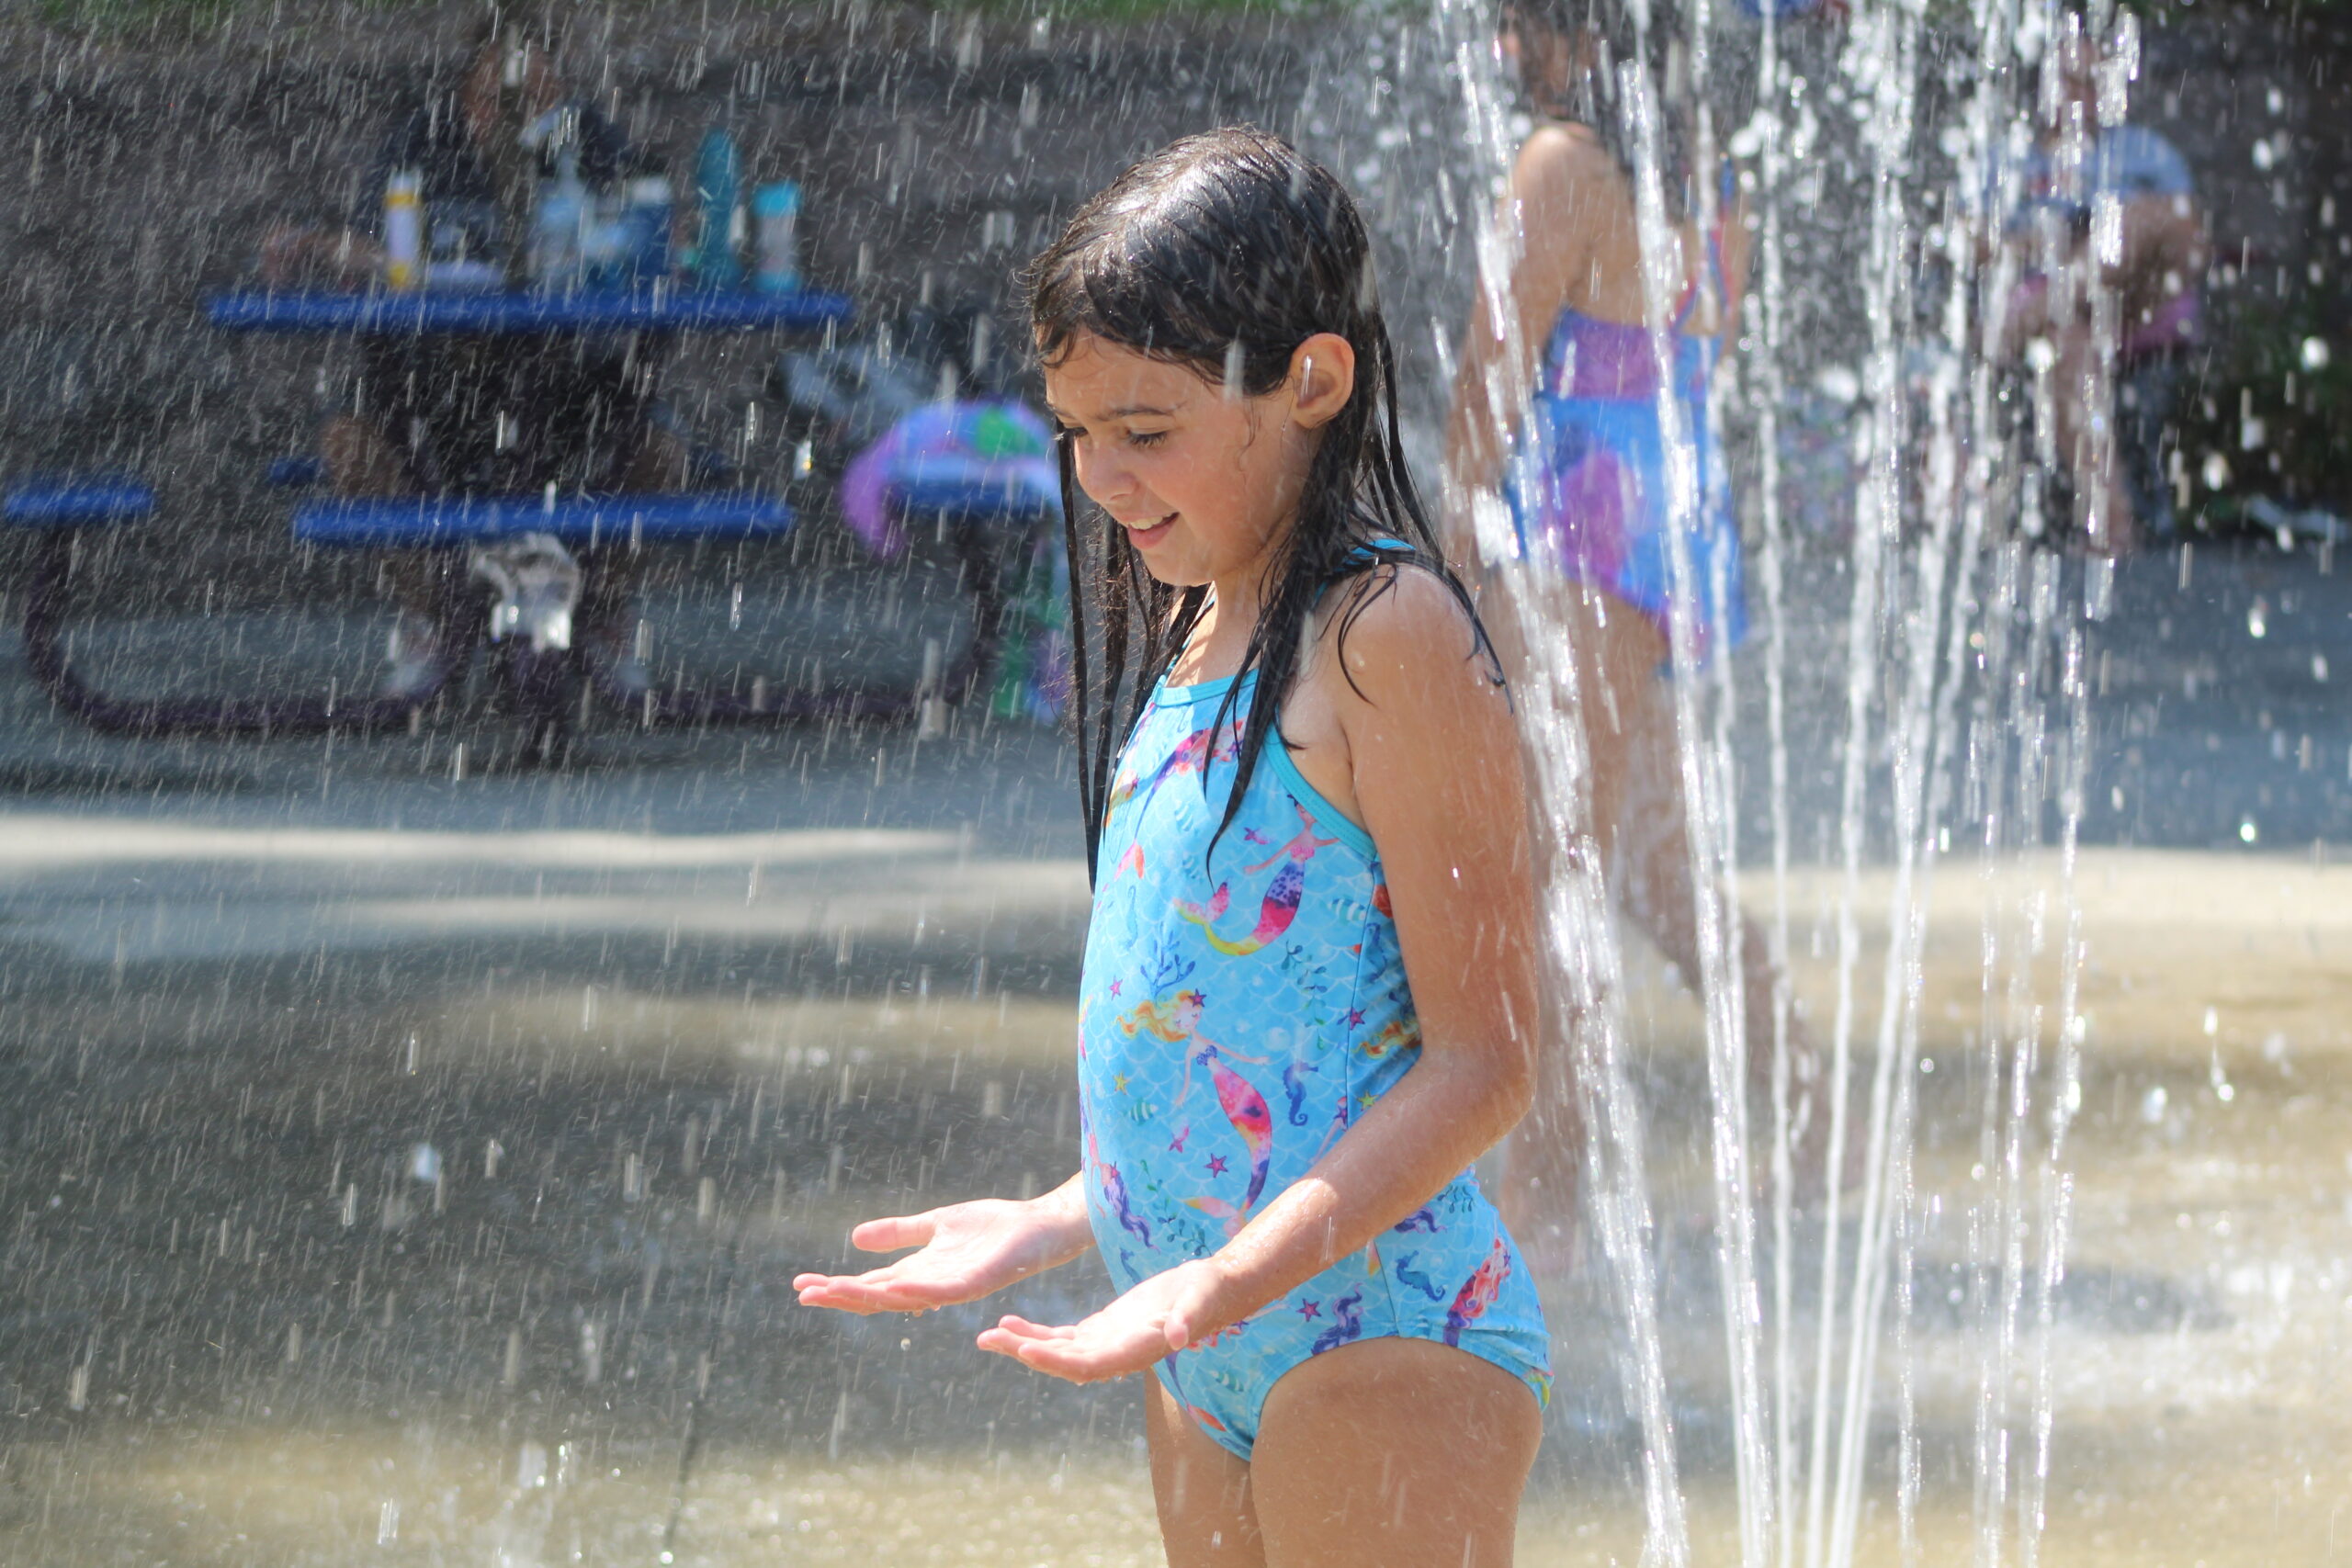 PHOTOS: Keeping cool in the summer heat